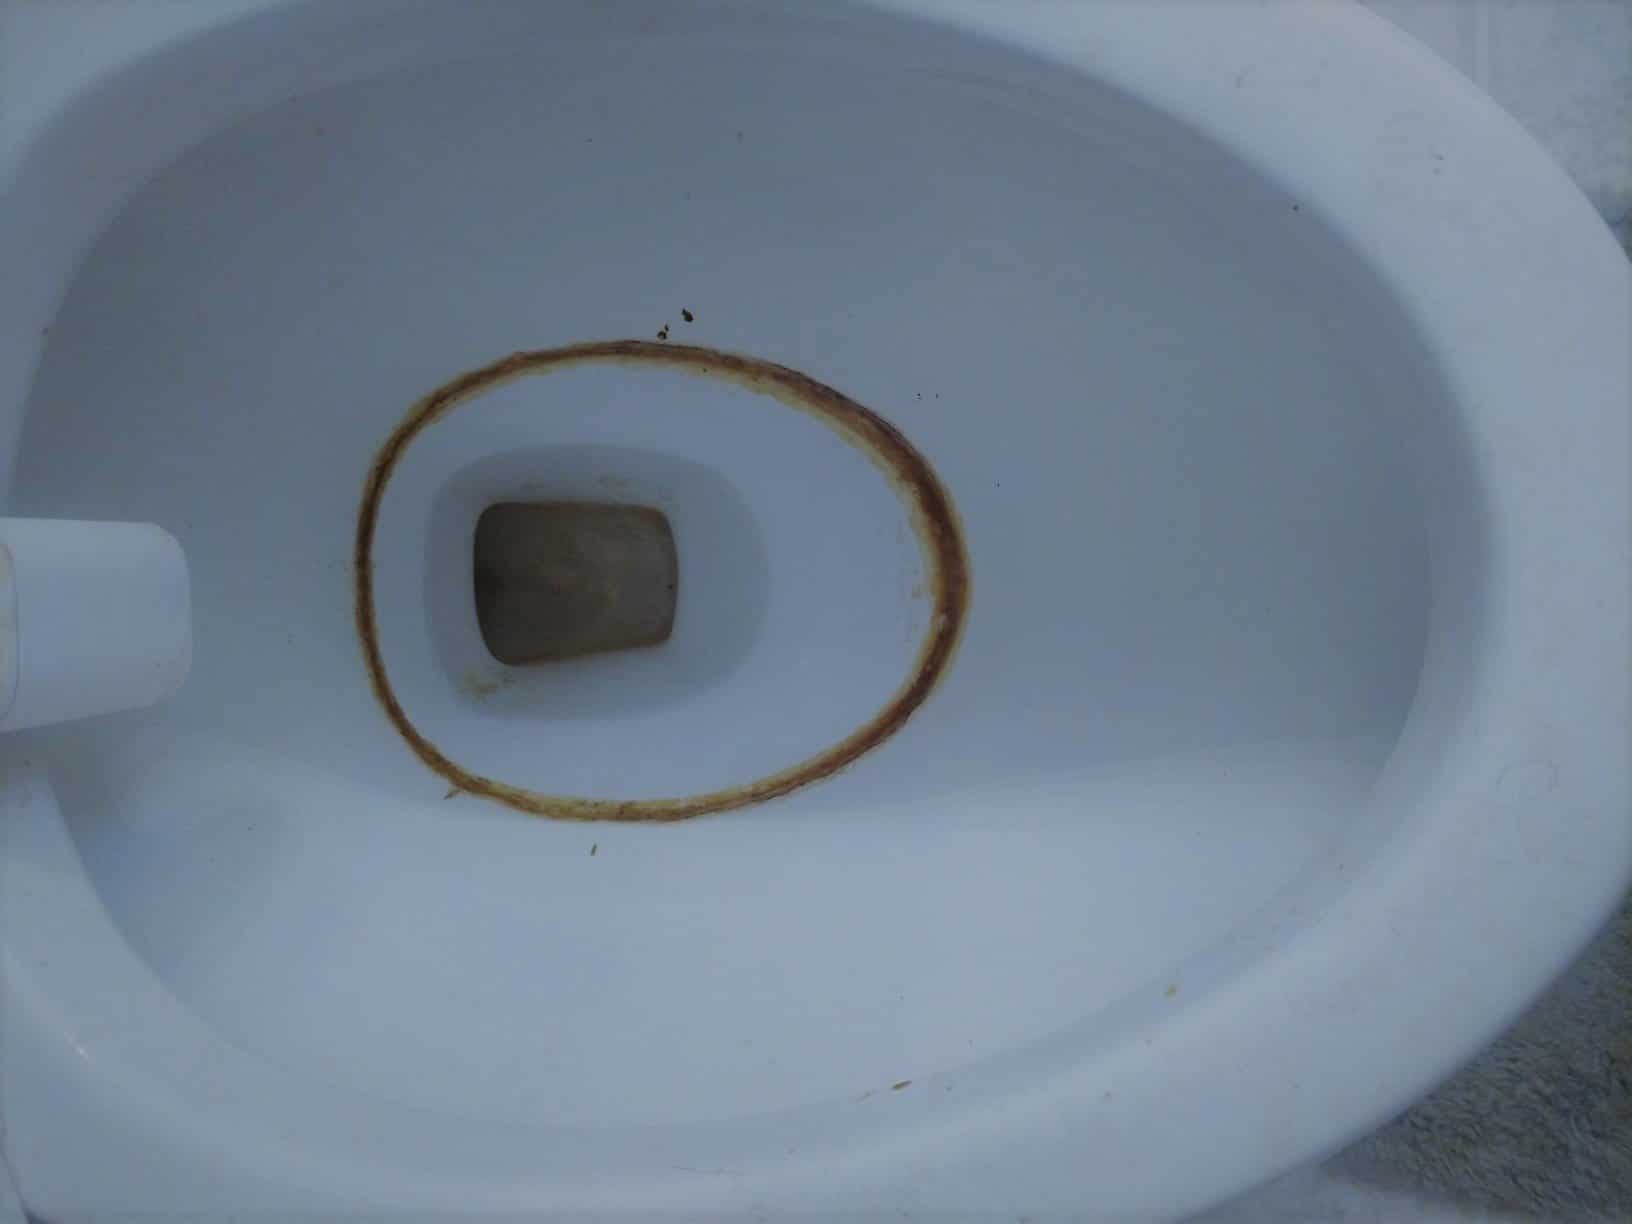 How to Get Rid of a Toilet Ring Without Scratching the Bowl - Toilet Haven